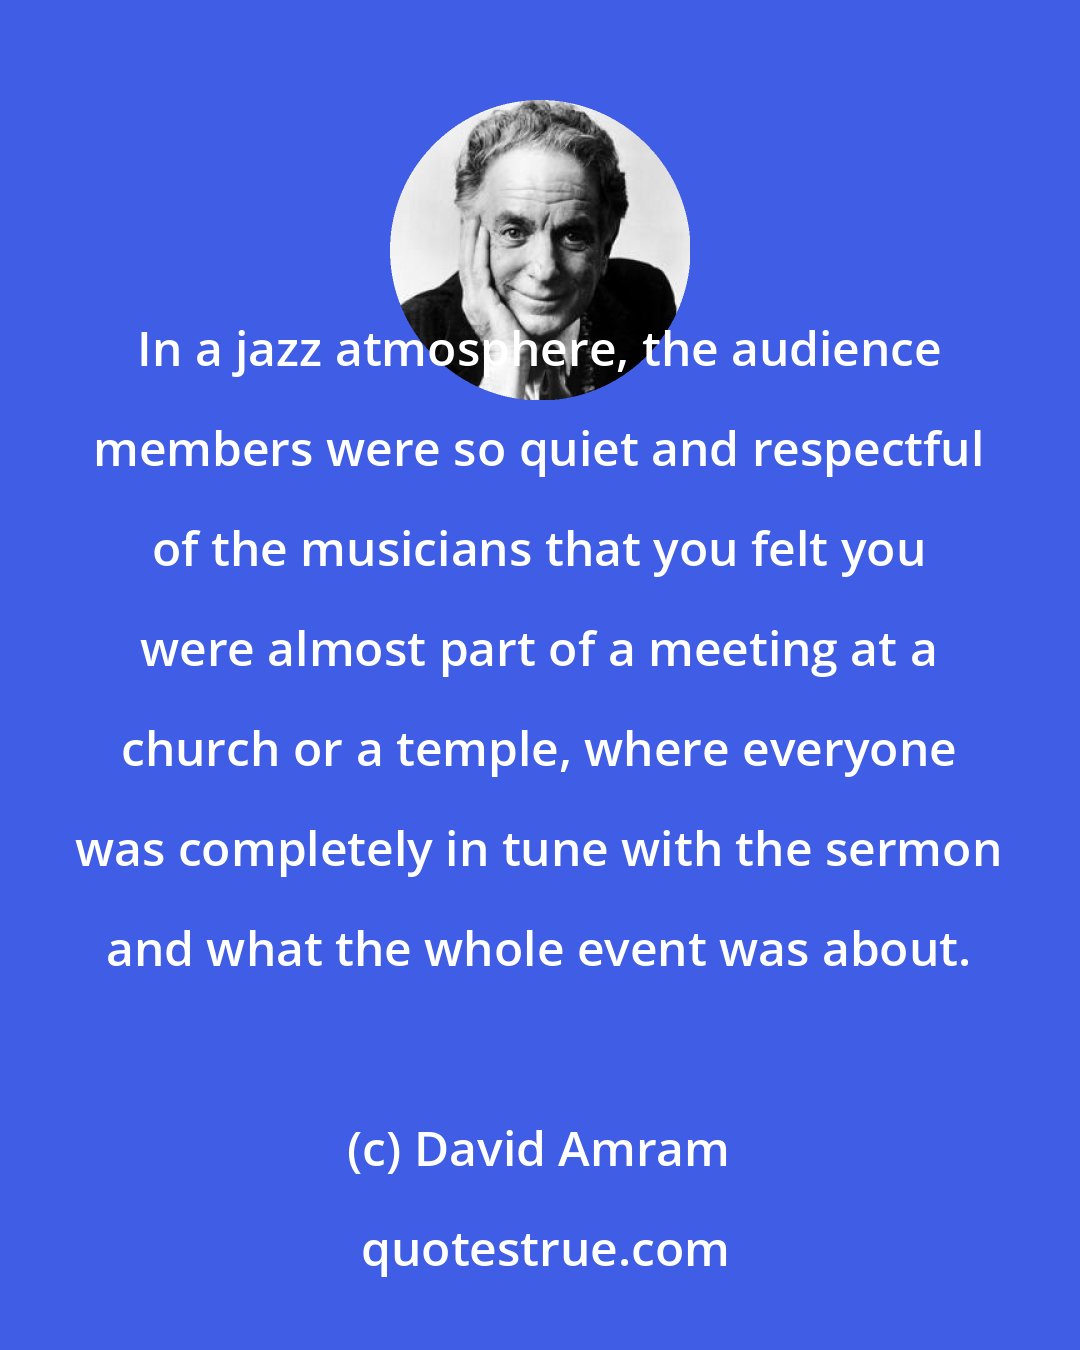 David Amram: In a jazz atmosphere, the audience members were so quiet and respectful of the musicians that you felt you were almost part of a meeting at a church or a temple, where everyone was completely in tune with the sermon and what the whole event was about.